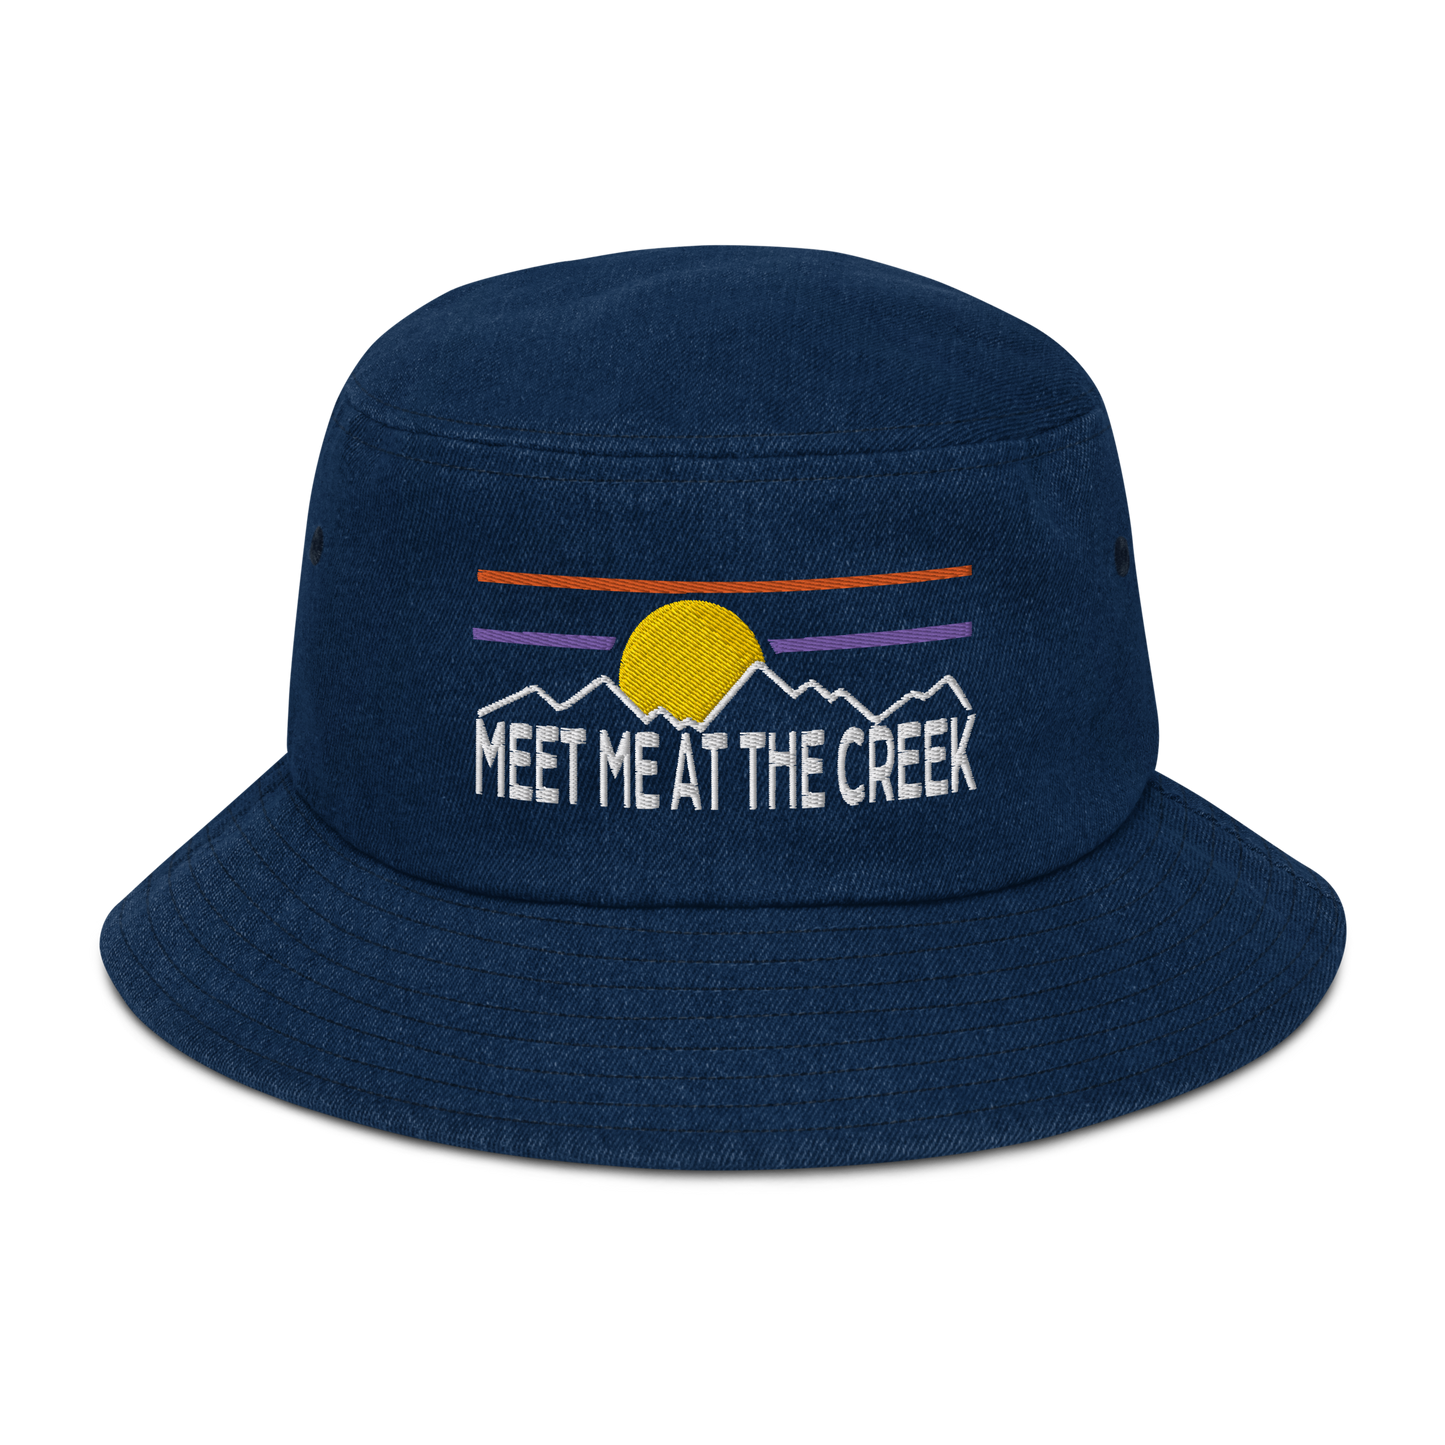 Meet Me At The Creek Denim bucket hat | Flat Embroidery | Inspired Billy Art